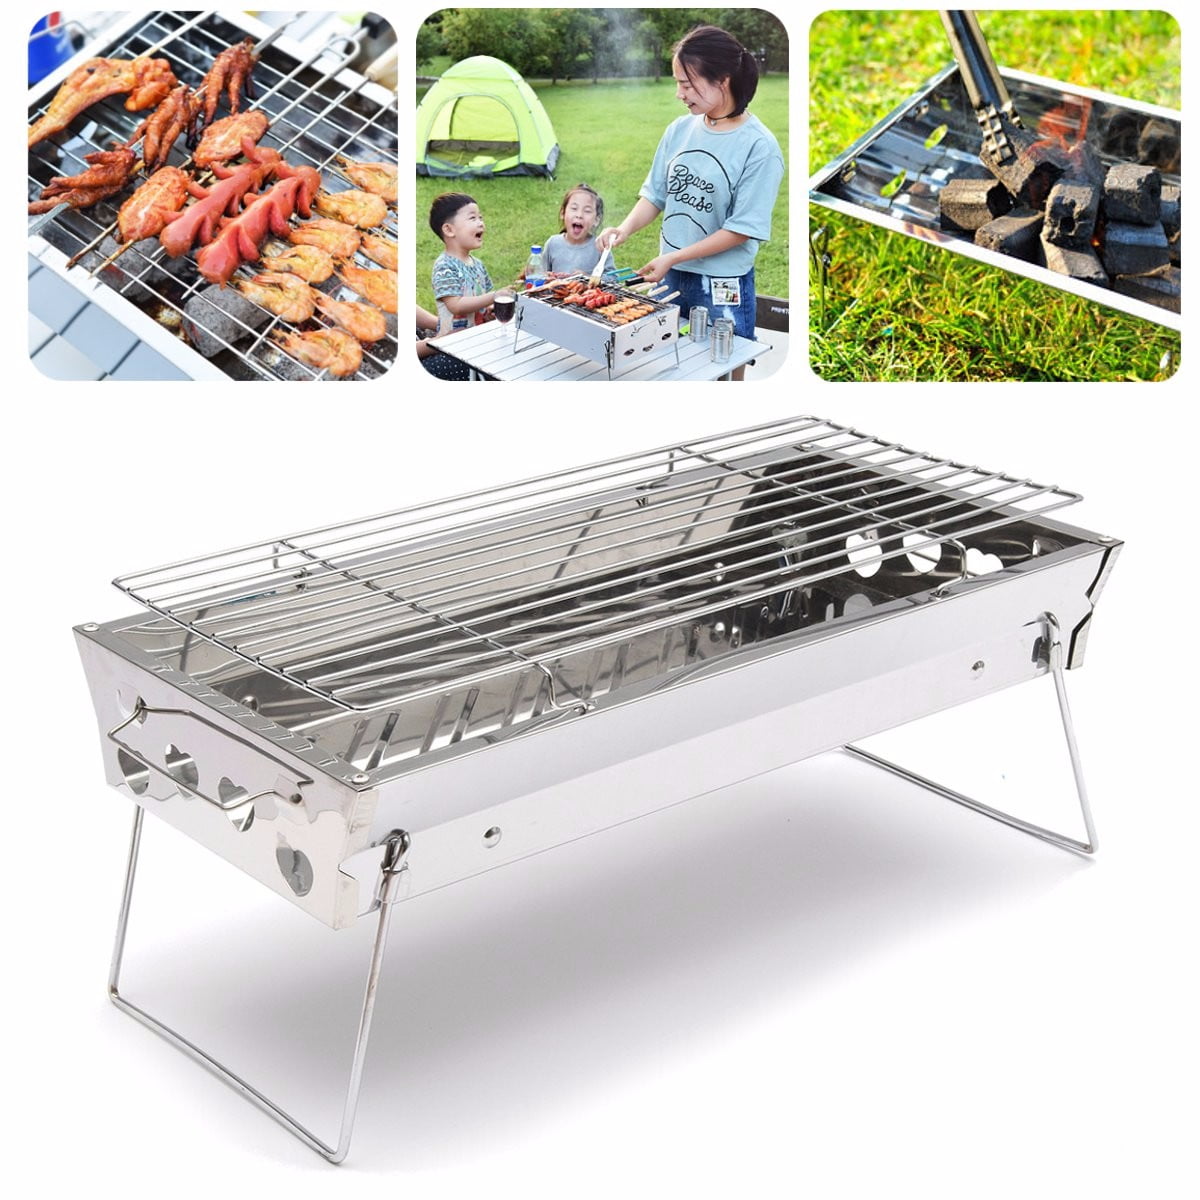 Outdoor Barbecue Charcoal Grill Stove Kabob Oven Stainless Steel BBQ Camping 